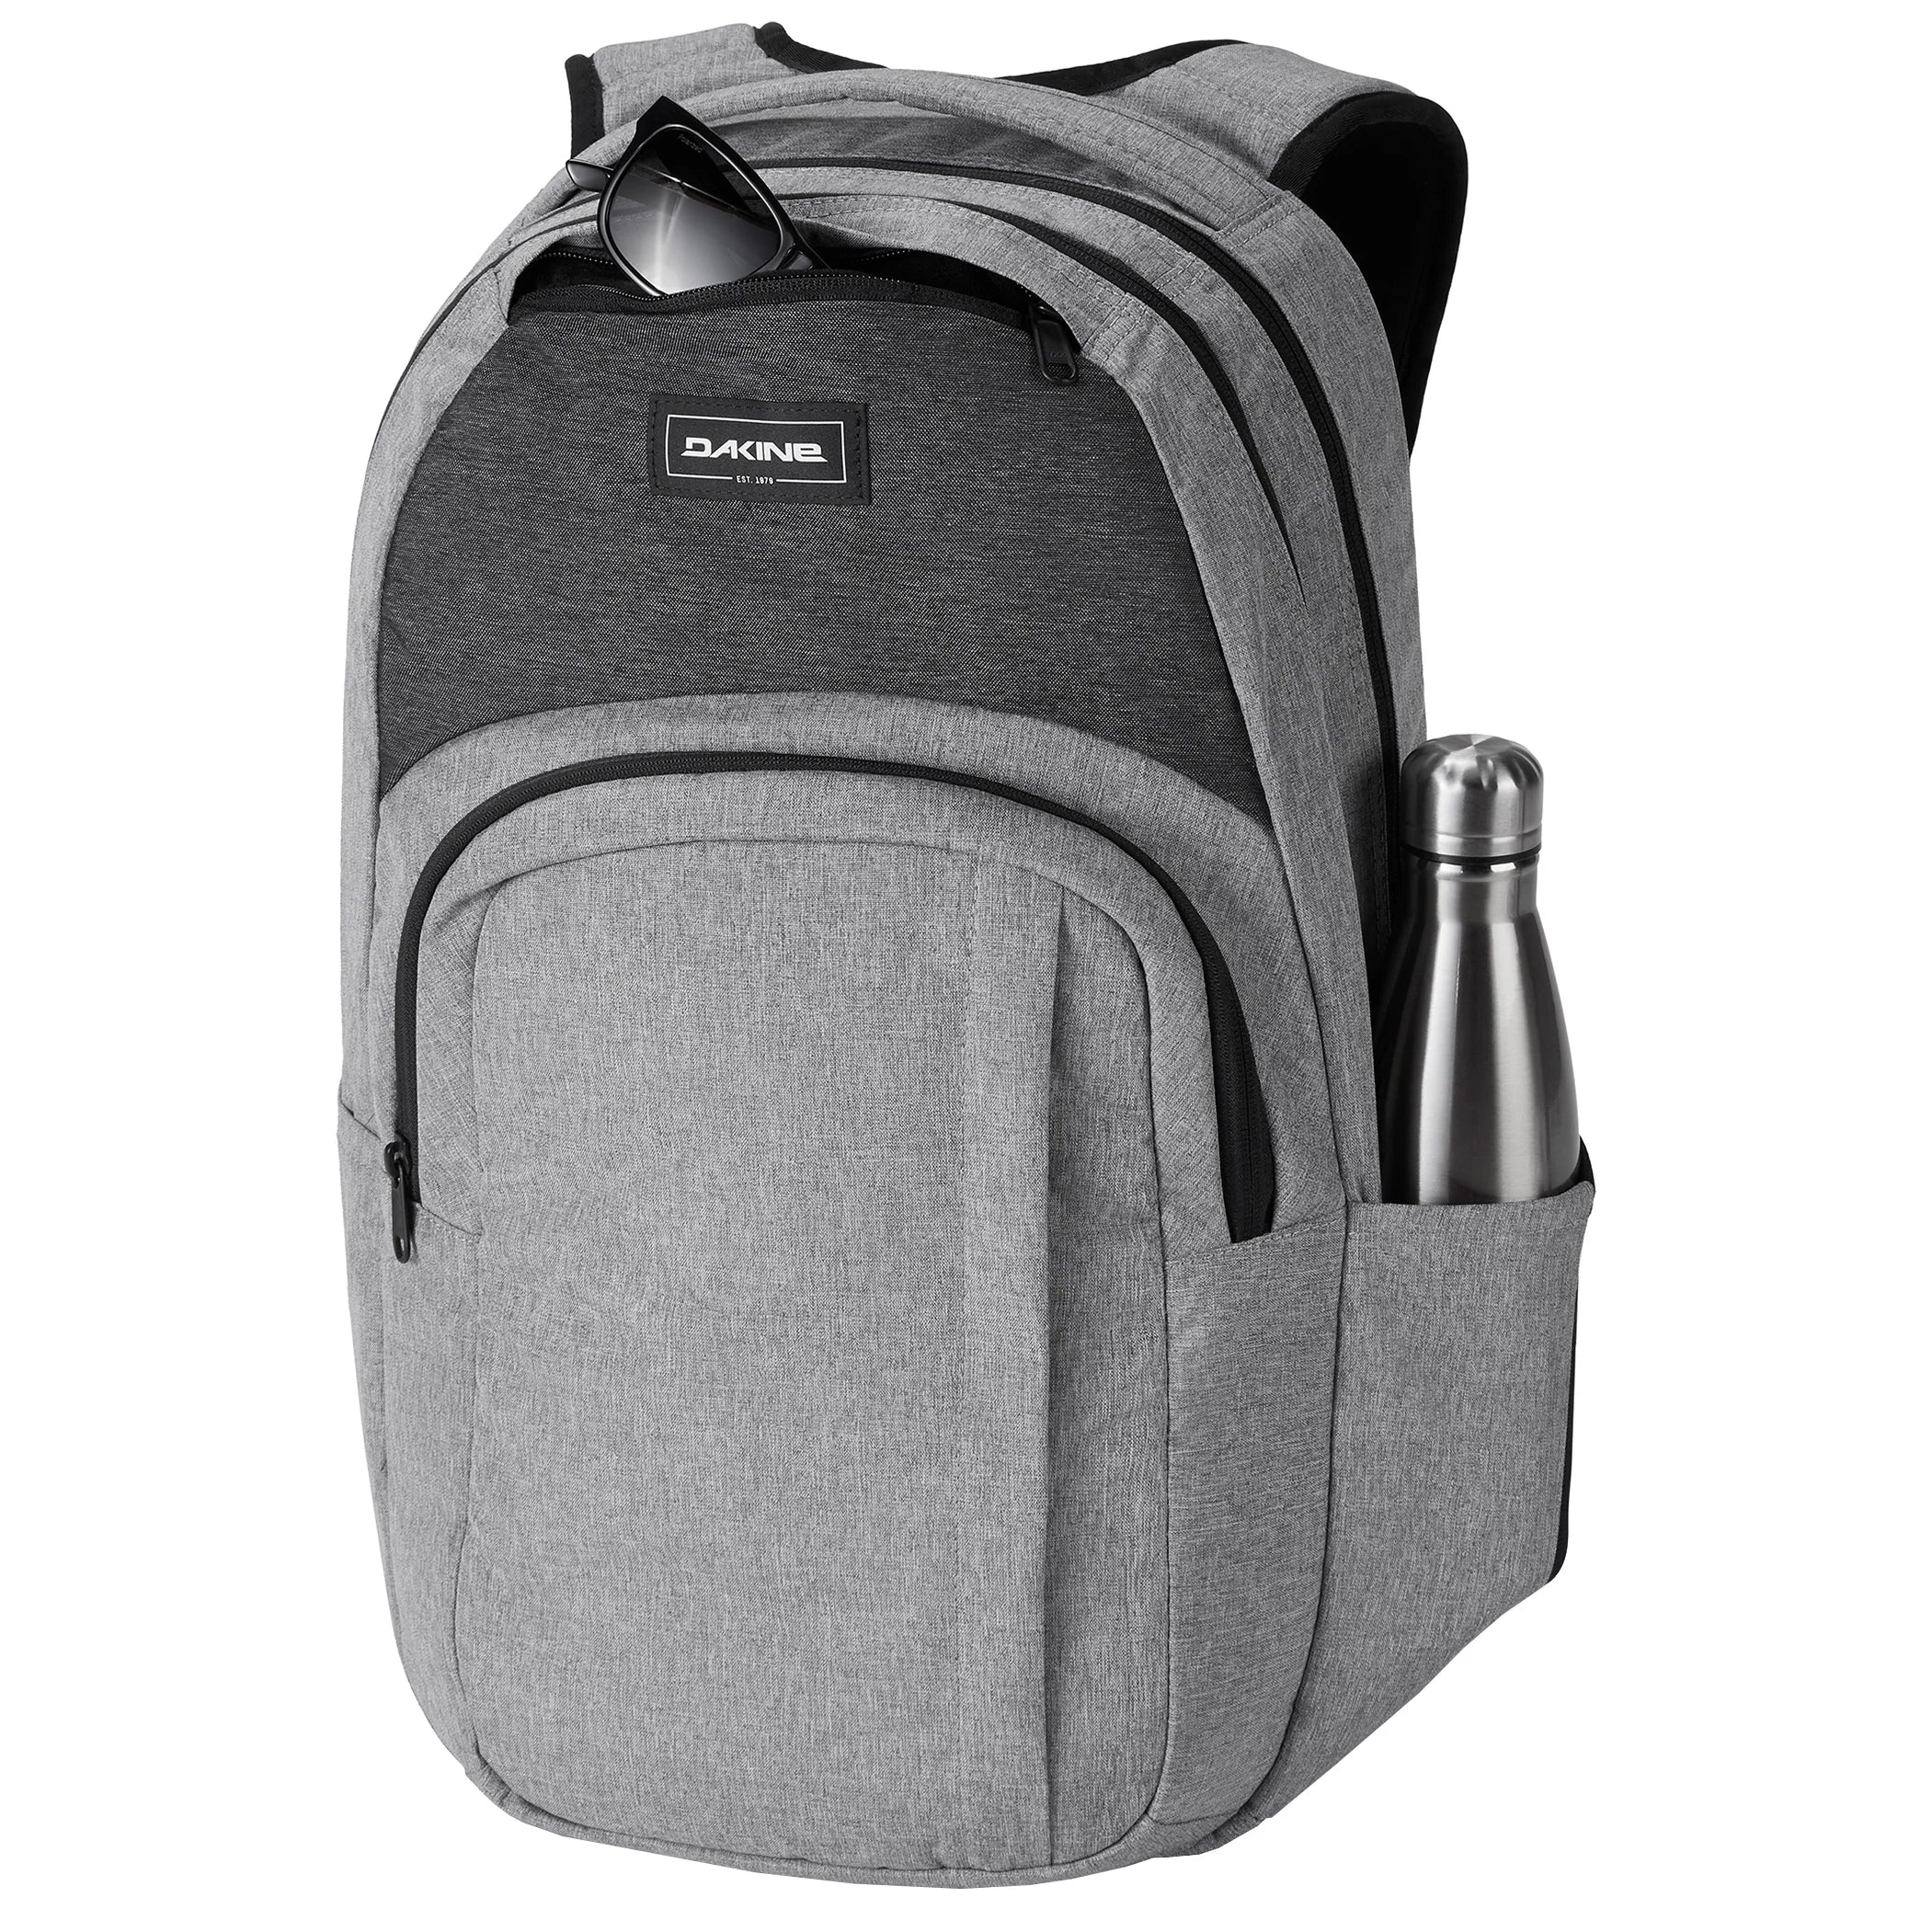 Dakine Packs & Bags Campus L 33L Backpack with Laptop Compartment 52 cm - Grapevine